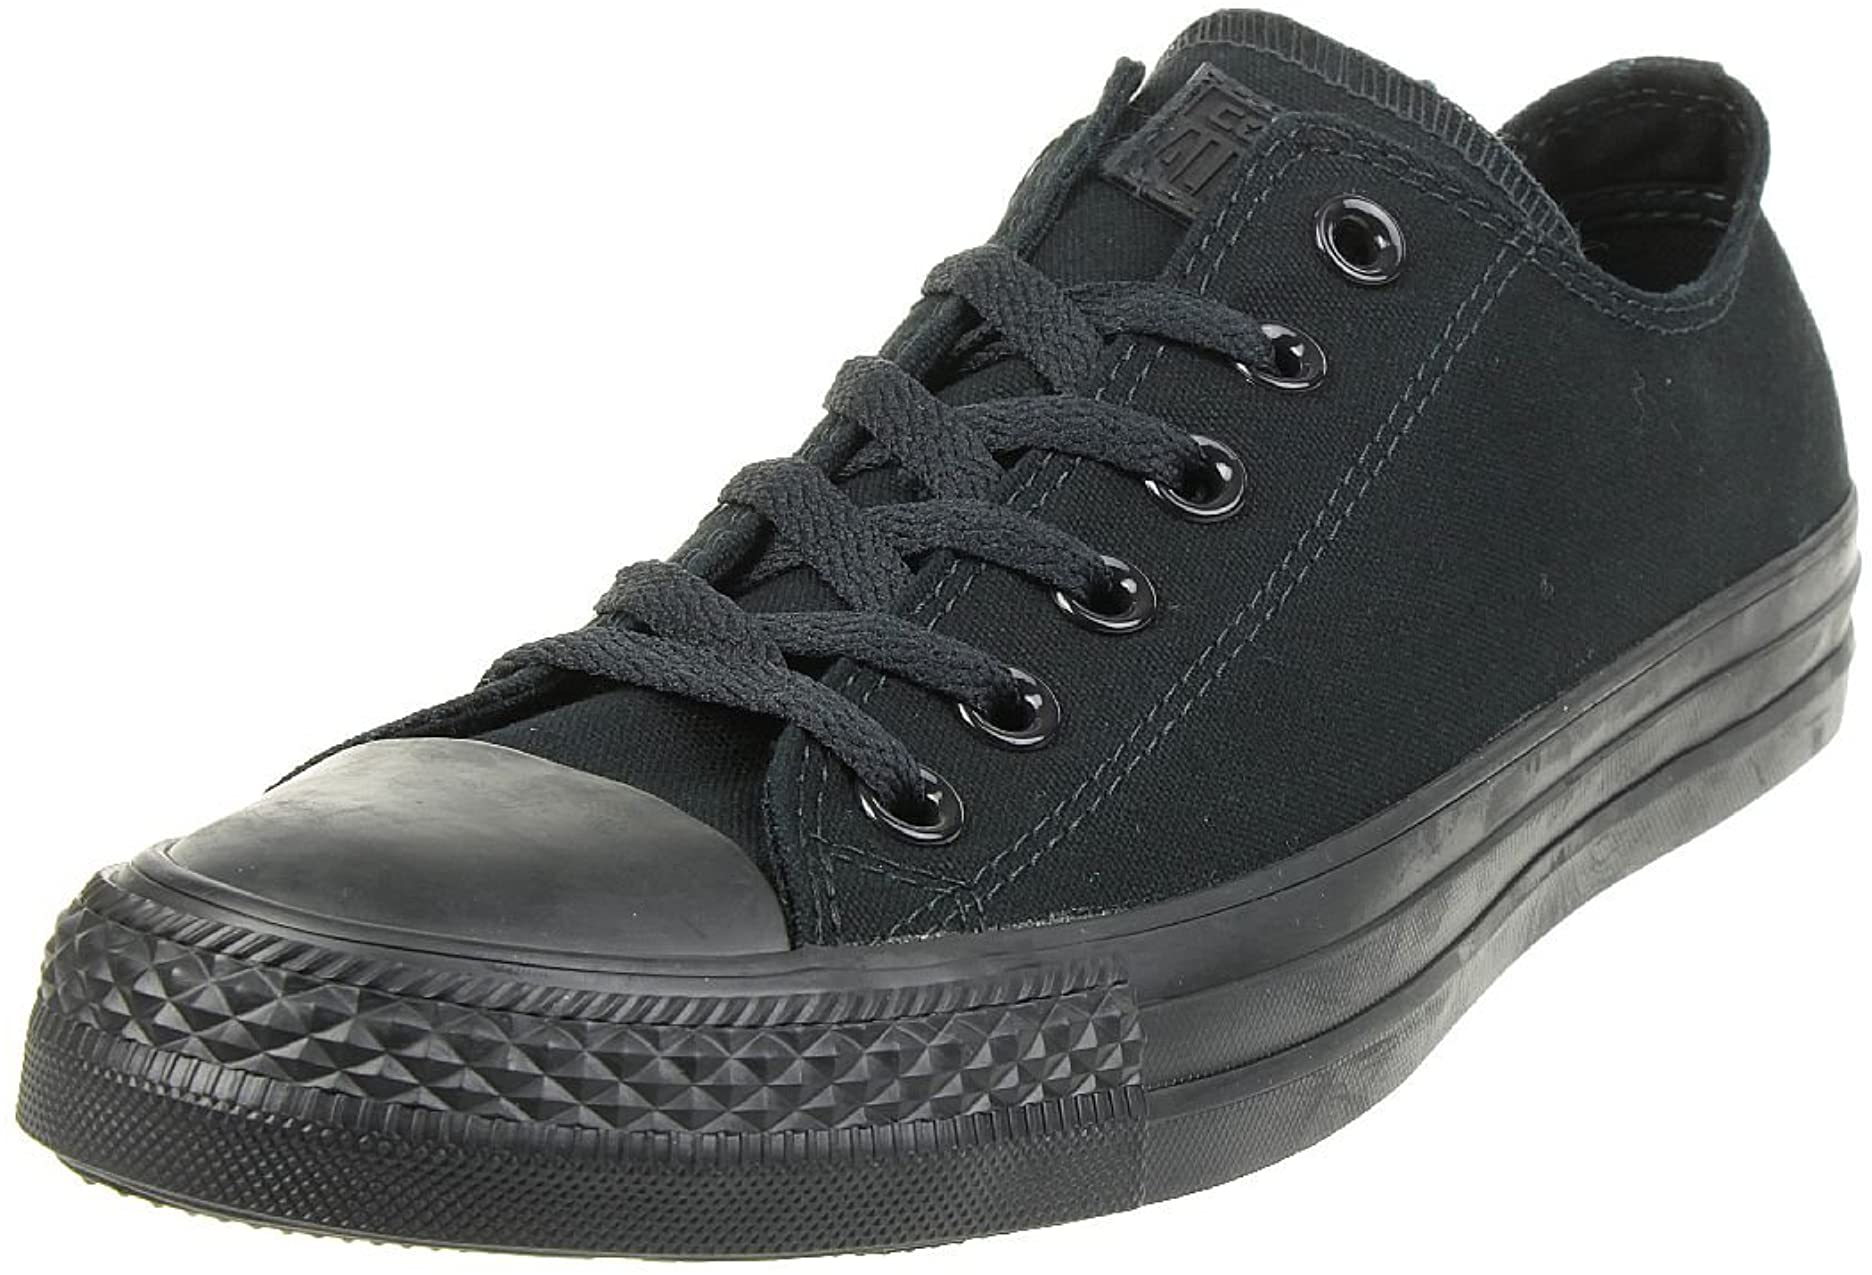 Converse Chuck Taylor All Star Mono Canvas Low Top Unisex Sneakers - Black - 4.5M/6.5W